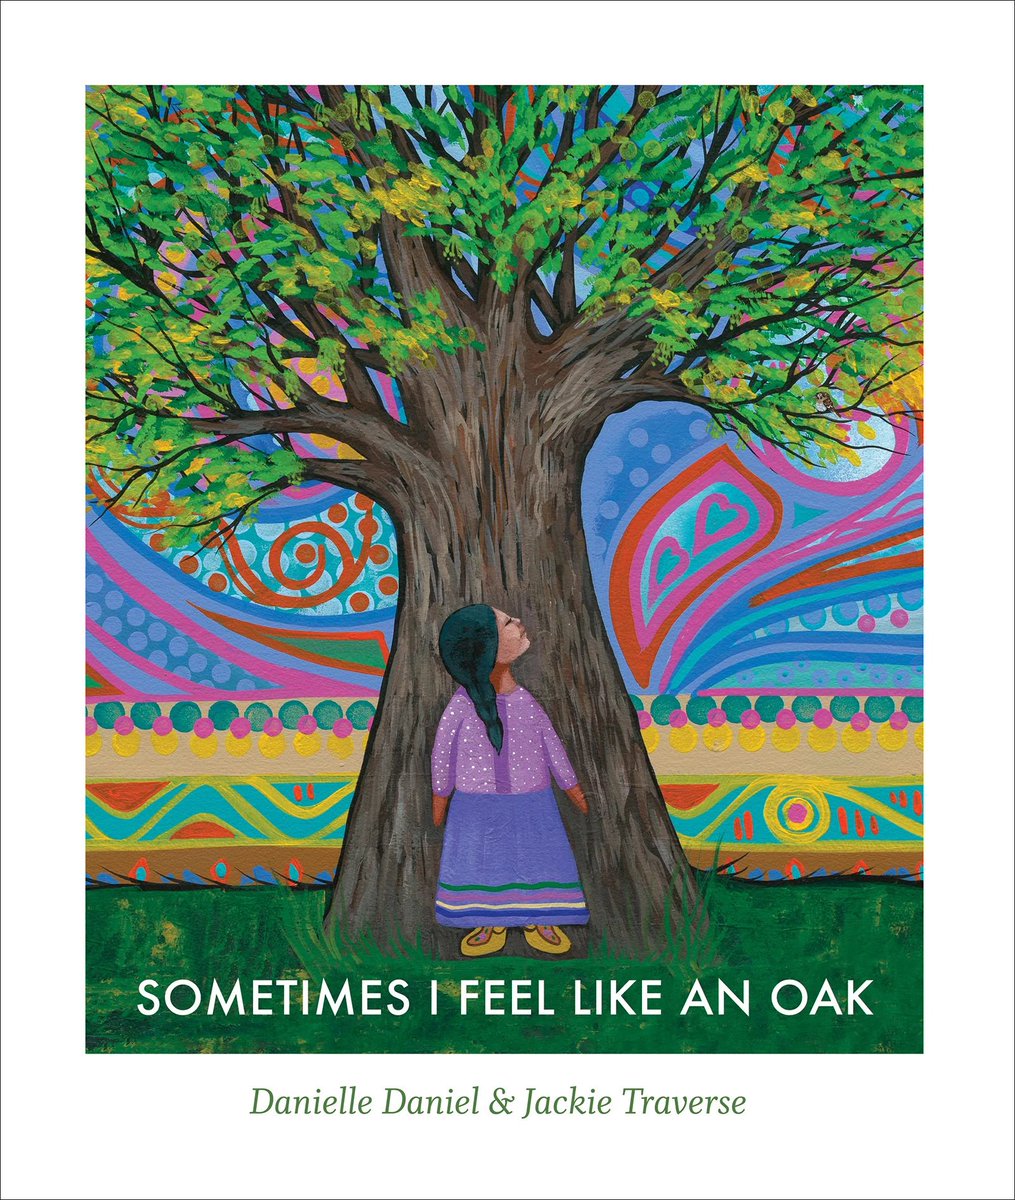 We’ve been so inspired this week by ‘Sometimes I Feel like an Oak’ by Danielle Daniel! Ss created tree silhouettes with sharpie on transparency sheets that were then placed on top of their oil pastel resist paintings inspired by the book’s cover 🌳✨